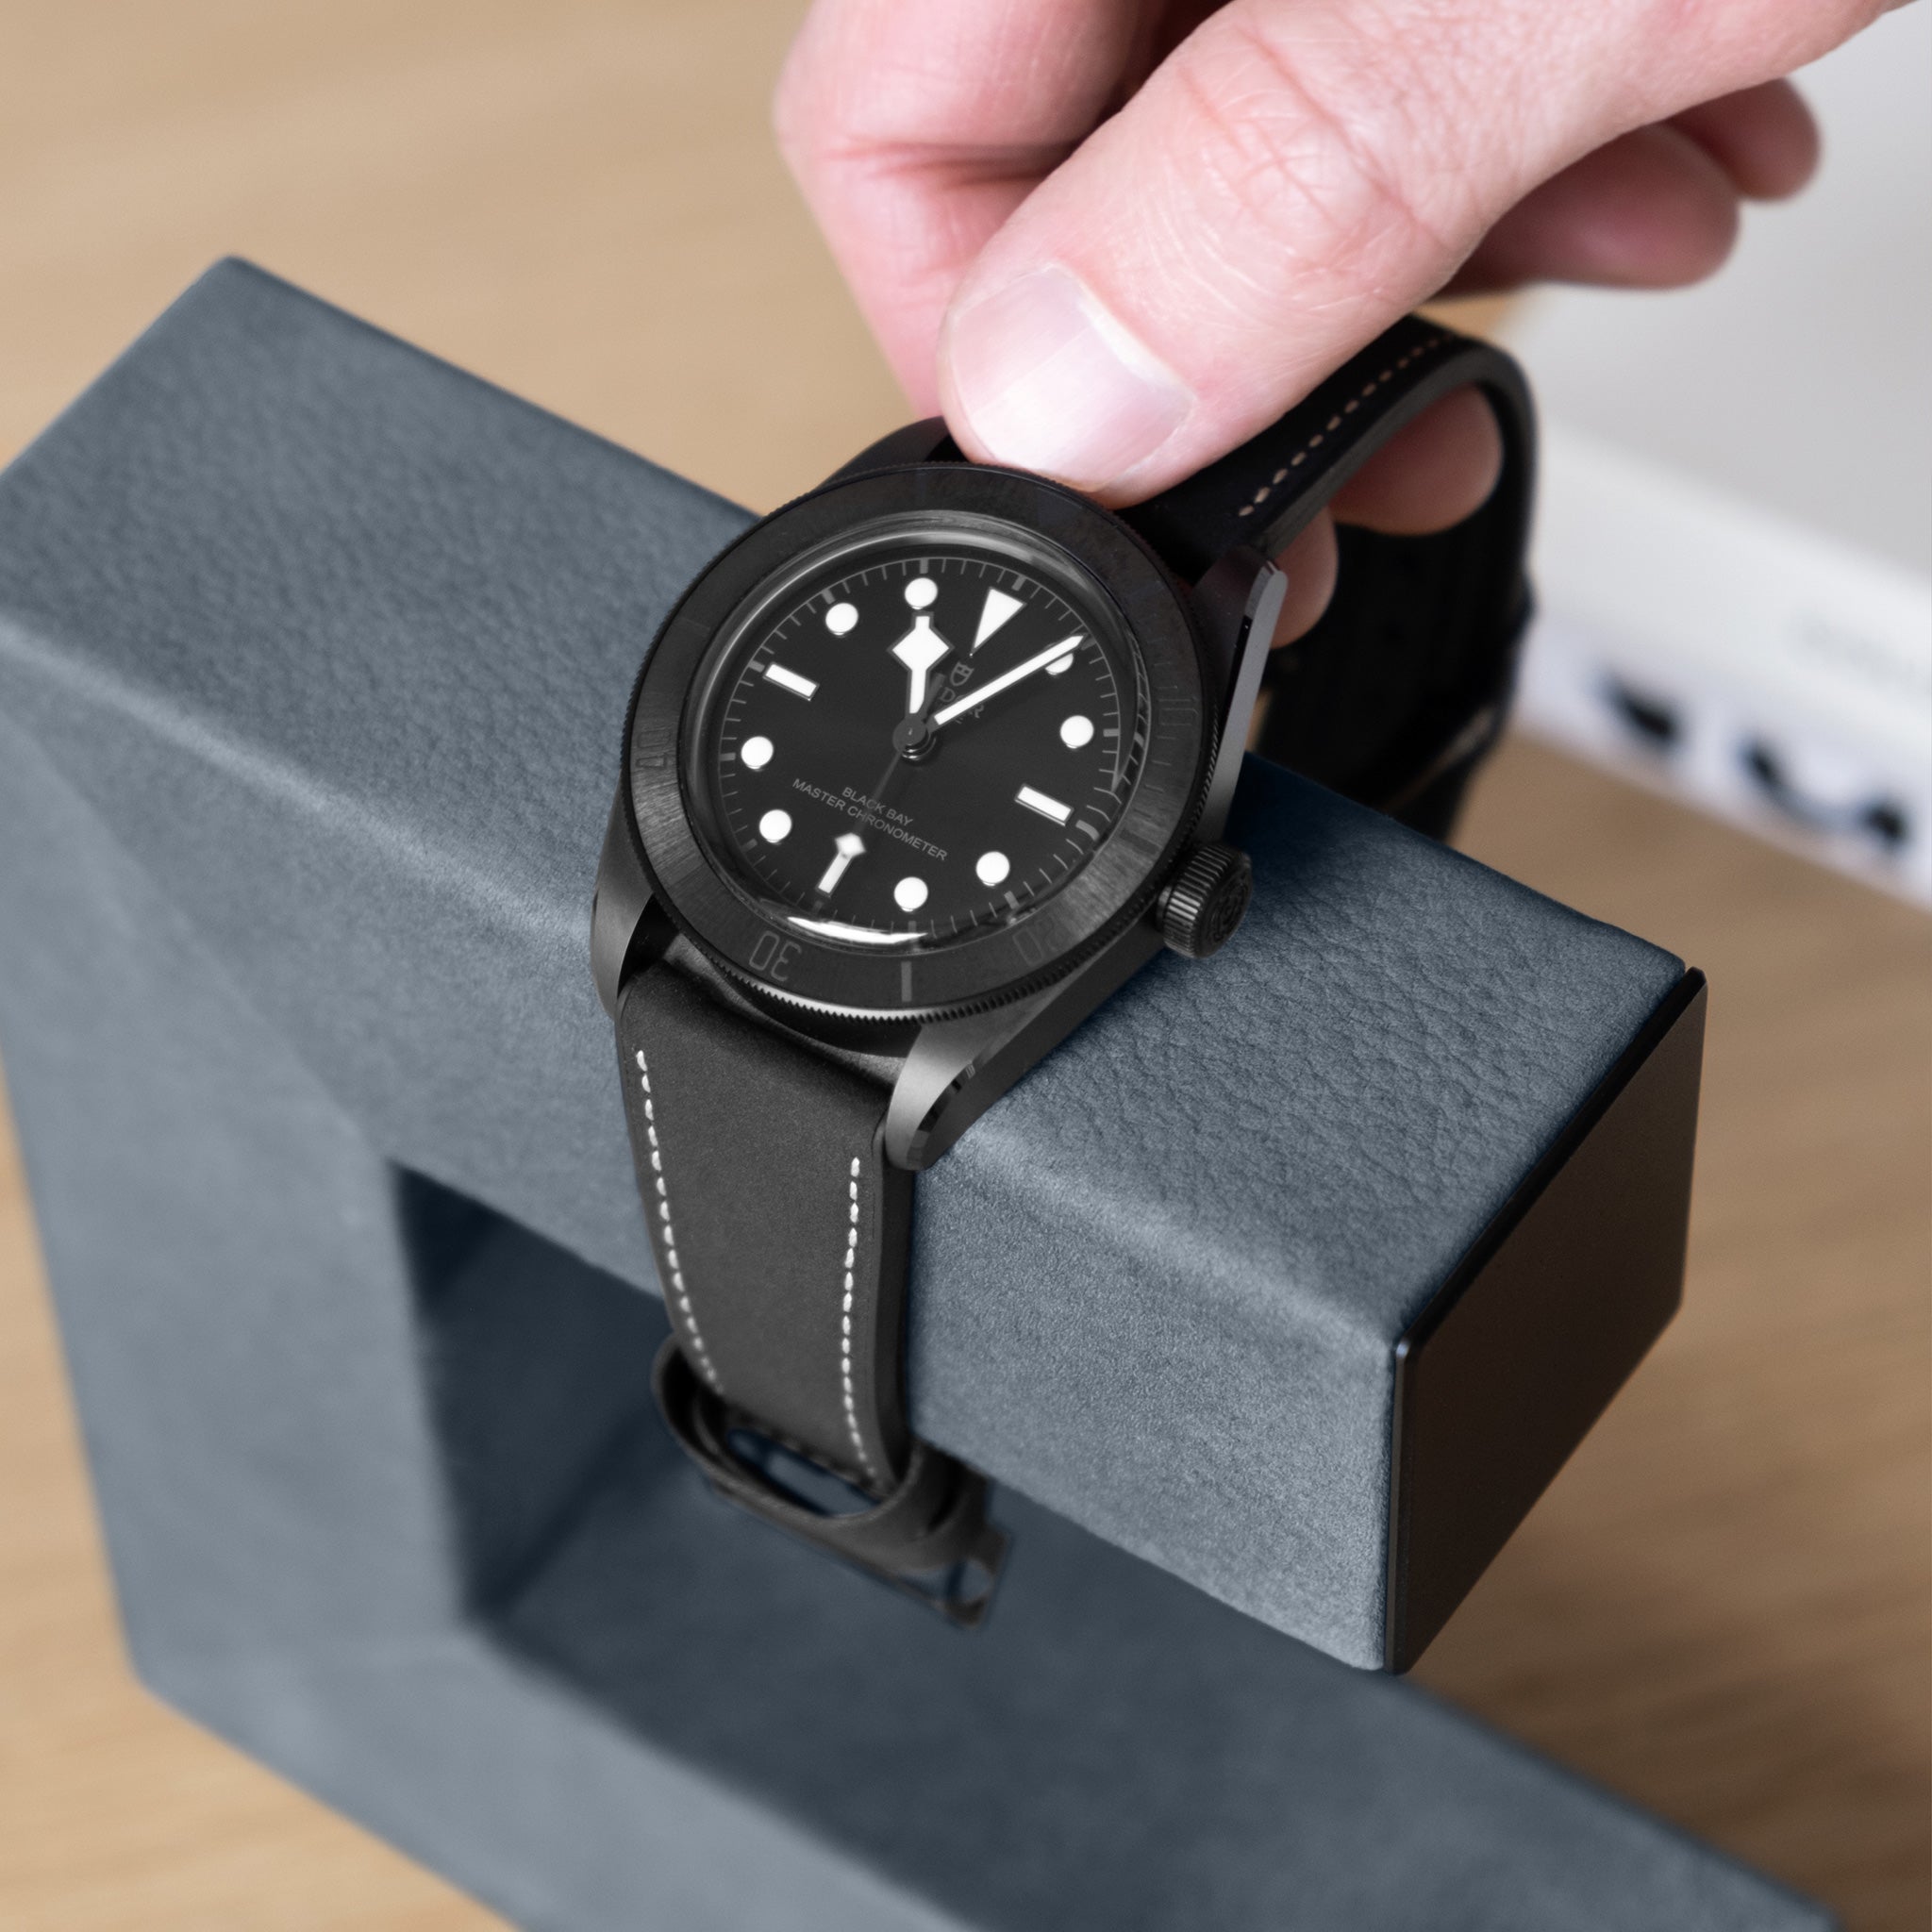 Men's watch being taken from luxury watch stand in dusty blue nubuck leather and black anodized aluminum.